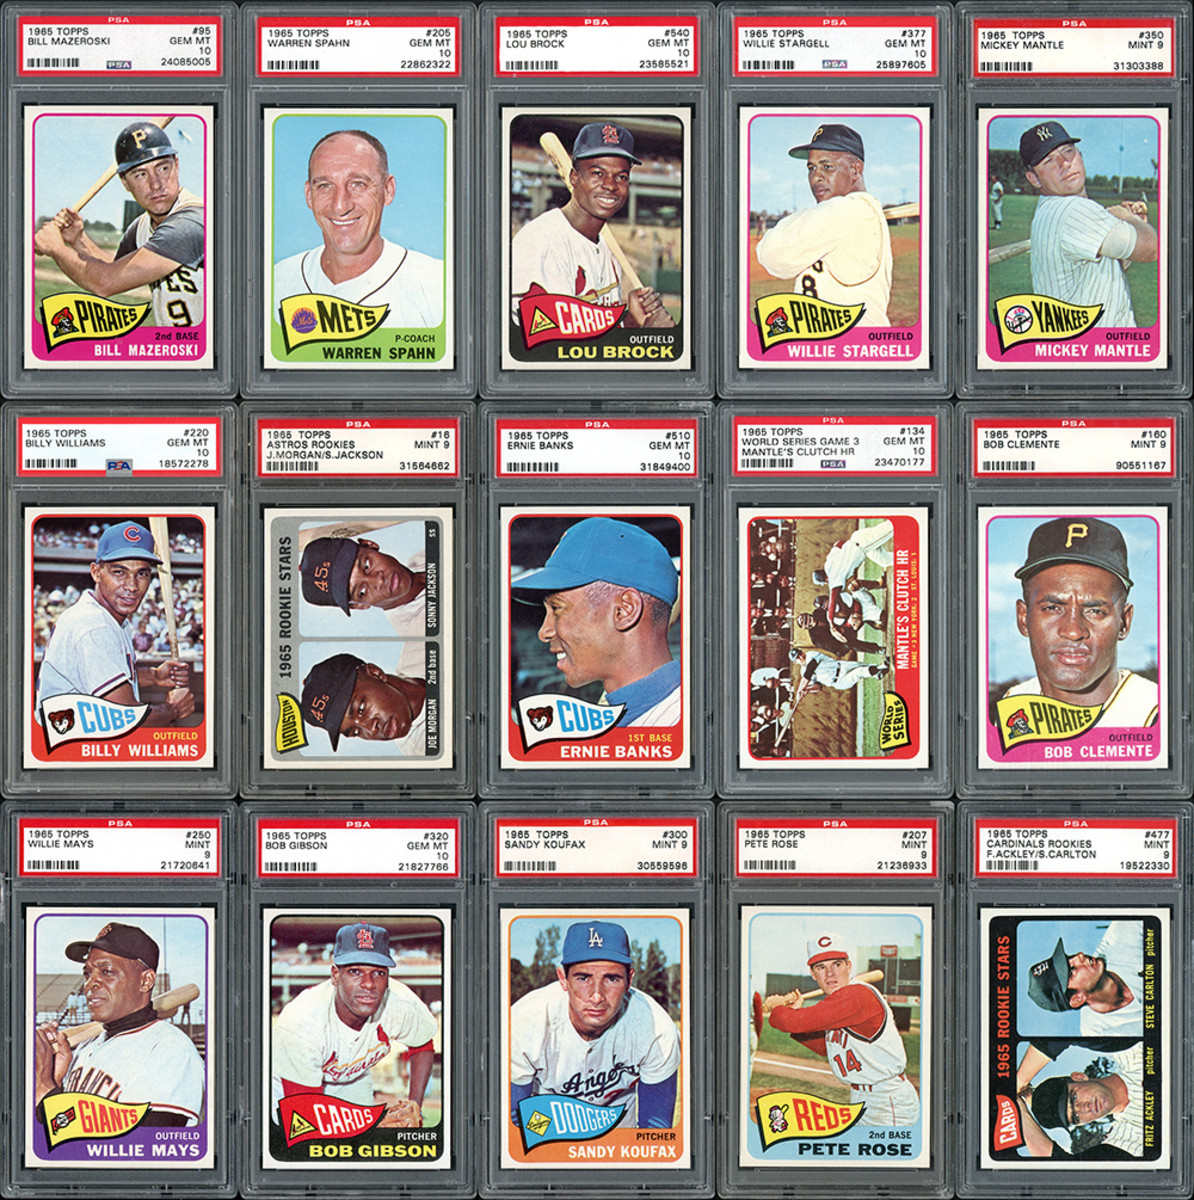 A 1964 Topps Complete set, ranked #2 on the PSA Set Registry.